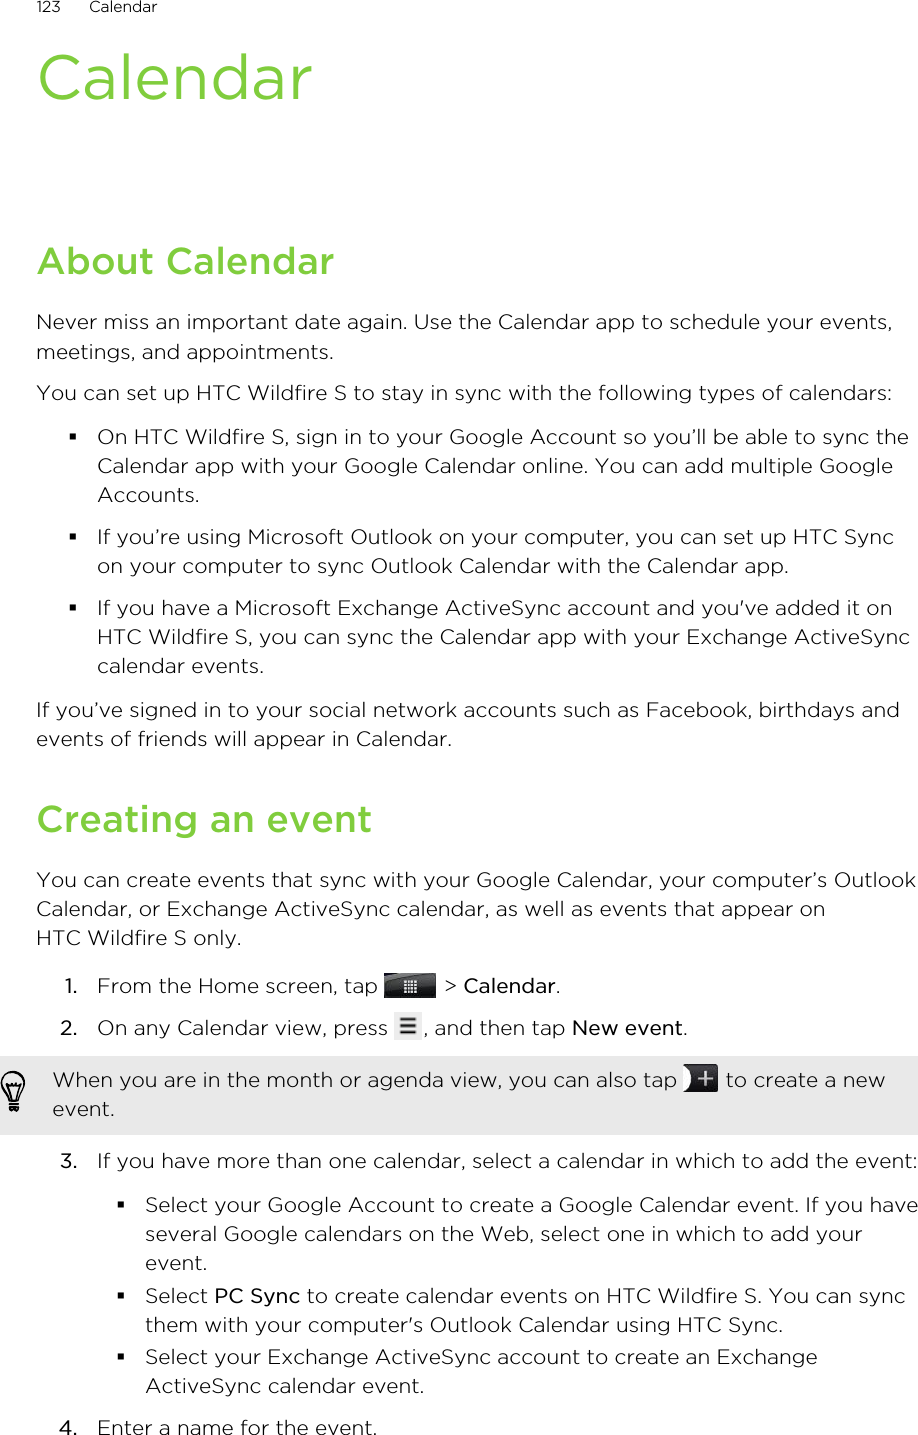 CalendarAbout CalendarNever miss an important date again. Use the Calendar app to schedule your events,meetings, and appointments.You can set up HTC Wildfire S to stay in sync with the following types of calendars:§On HTC Wildfire S, sign in to your Google Account so you’ll be able to sync theCalendar app with your Google Calendar online. You can add multiple GoogleAccounts.§If you’re using Microsoft Outlook on your computer, you can set up HTC Syncon your computer to sync Outlook Calendar with the Calendar app.§If you have a Microsoft Exchange ActiveSync account and you&apos;ve added it onHTC Wildfire S, you can sync the Calendar app with your Exchange ActiveSynccalendar events.If you’ve signed in to your social network accounts such as Facebook, birthdays andevents of friends will appear in Calendar.Creating an eventYou can create events that sync with your Google Calendar, your computer’s OutlookCalendar, or Exchange ActiveSync calendar, as well as events that appear onHTC Wildfire S only.1. From the Home screen, tap   &gt; Calendar.2. On any Calendar view, press  , and then tap New event. When you are in the month or agenda view, you can also tap   to create a newevent.3. If you have more than one calendar, select a calendar in which to add the event:§Select your Google Account to create a Google Calendar event. If you haveseveral Google calendars on the Web, select one in which to add yourevent.§Select PC Sync to create calendar events on HTC Wildfire S. You can syncthem with your computer&apos;s Outlook Calendar using HTC Sync.§Select your Exchange ActiveSync account to create an ExchangeActiveSync calendar event.4. Enter a name for the event.123 Calendar